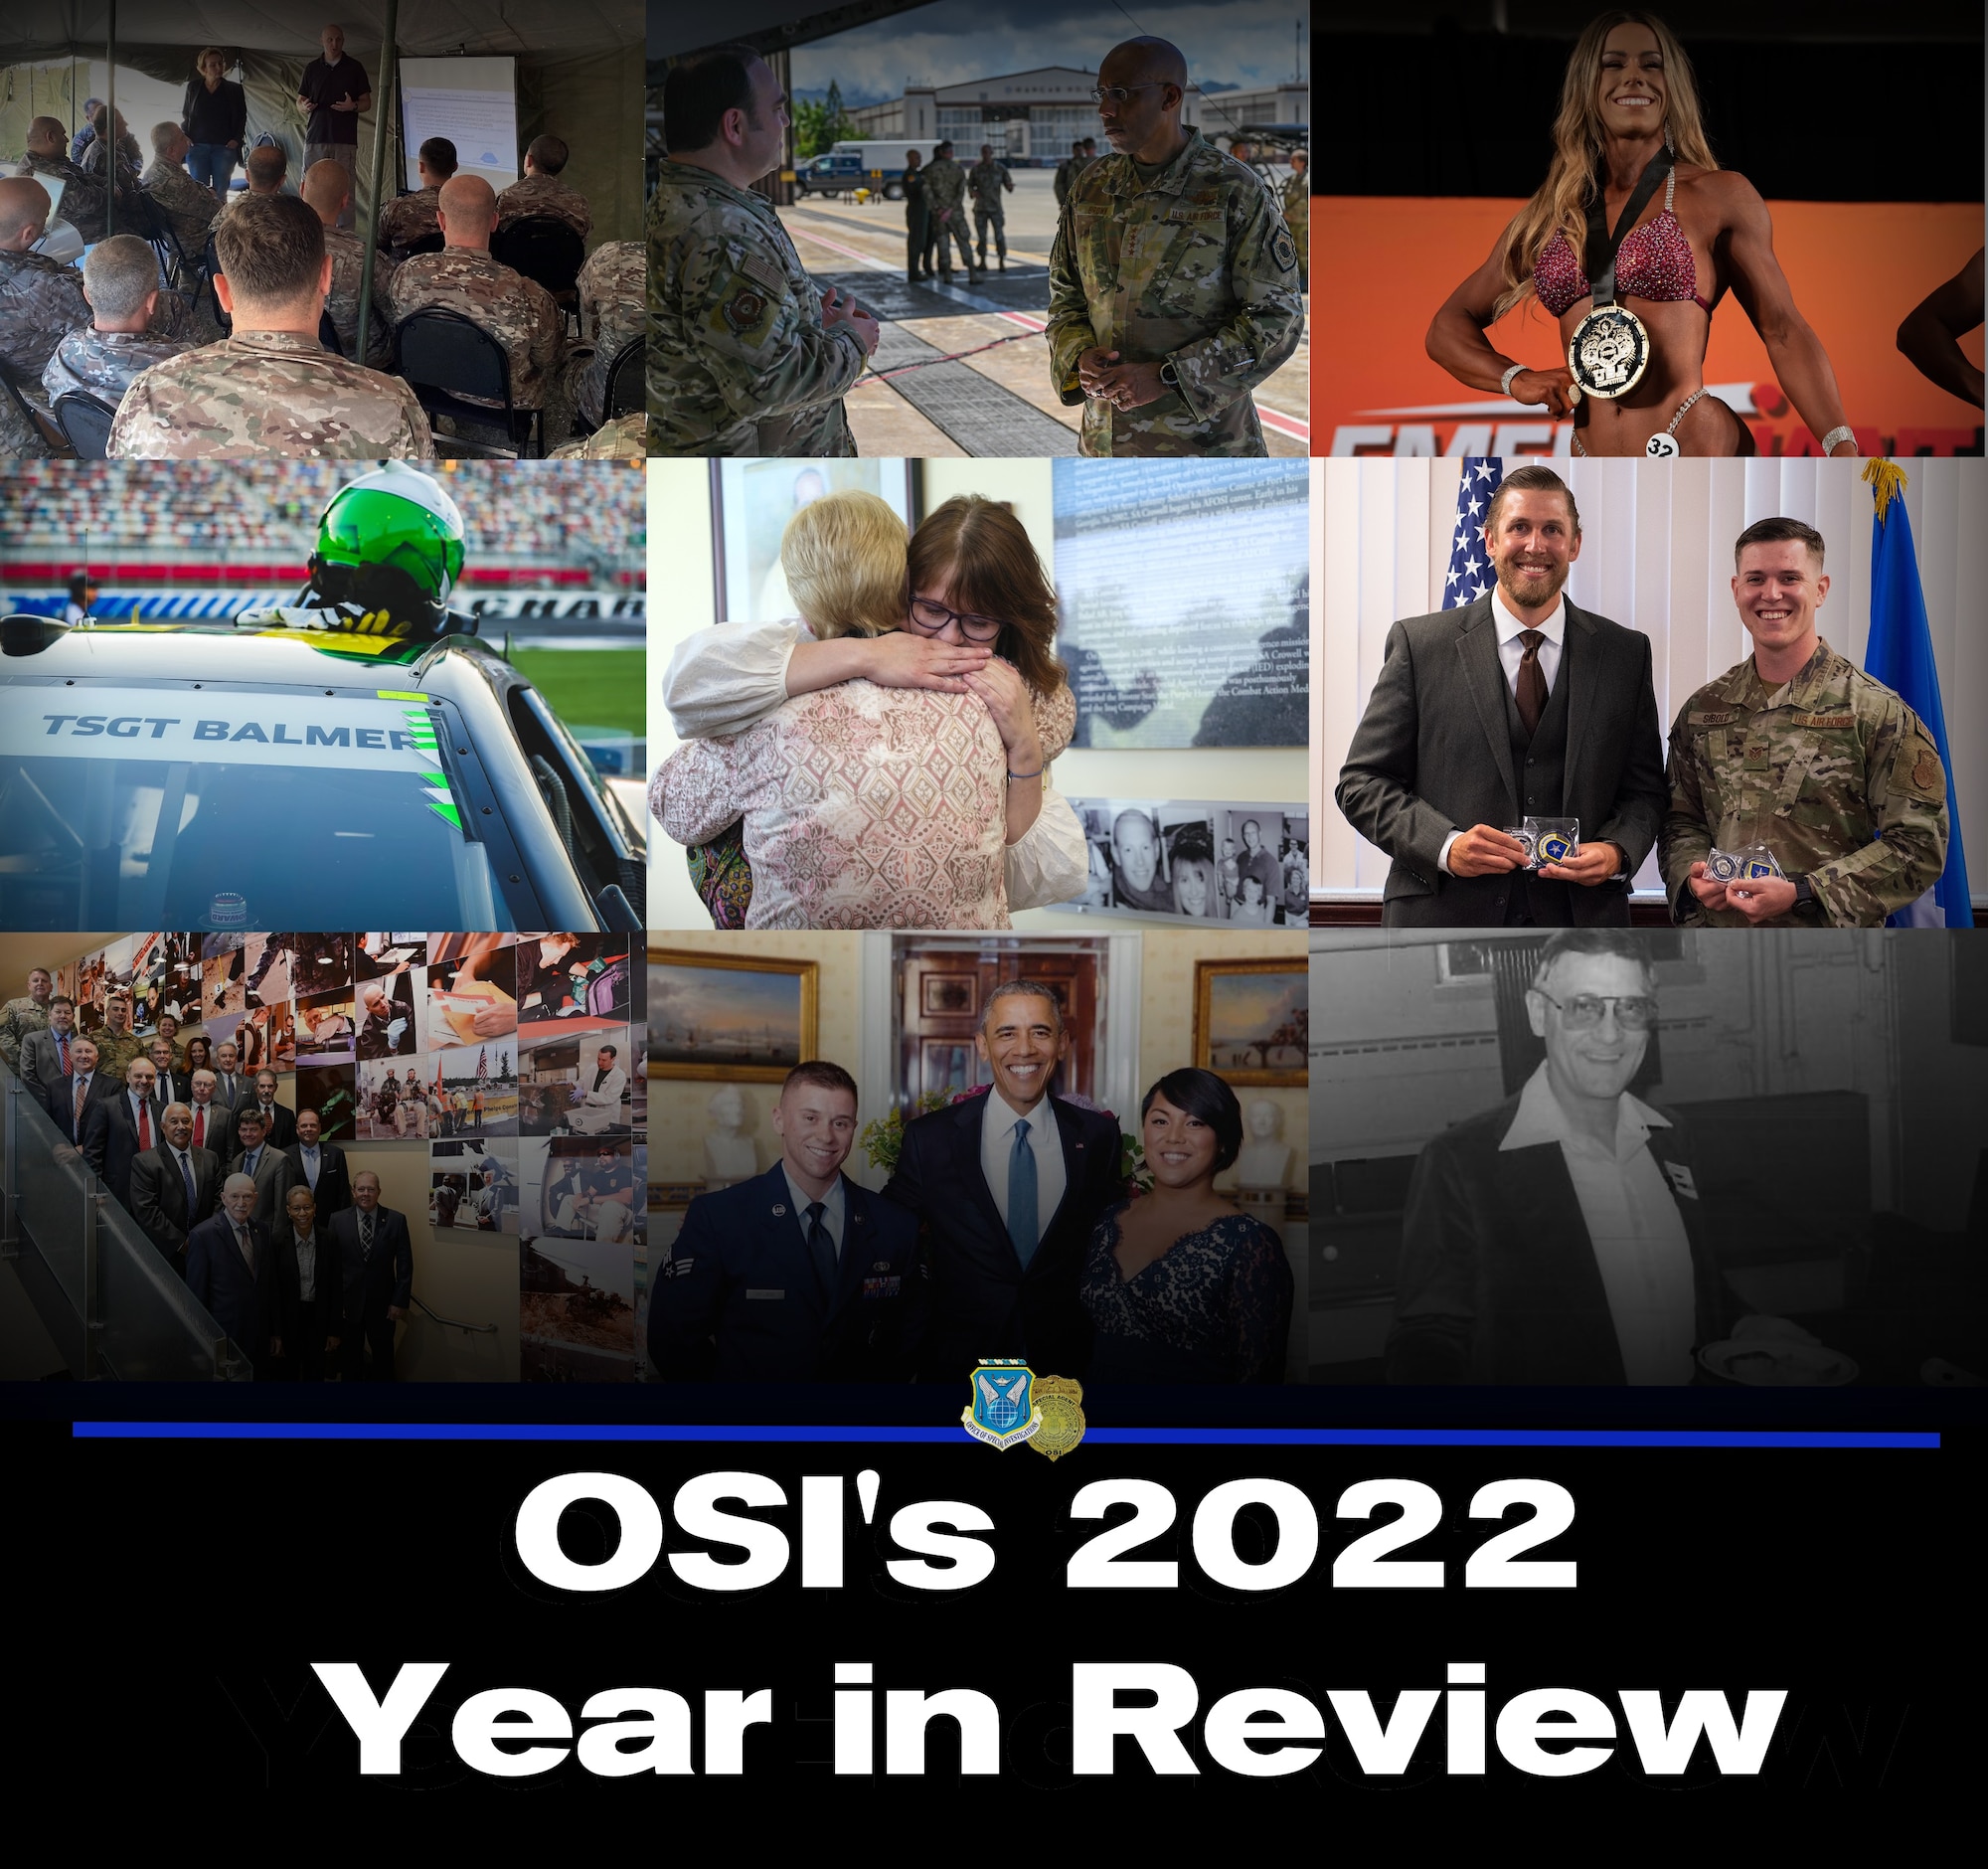 2022 has been a banner year for the Office of Special Investigations, bringing new challenges, inspiring stories, modern weapons, many closed cases and more that have defined OSI as a premiere federal law enforcement agency. As 2023 looms, we look back on several stories that paved our way the past 12 months. (Photo/graphic by Thomas Brading, OSI/PA)